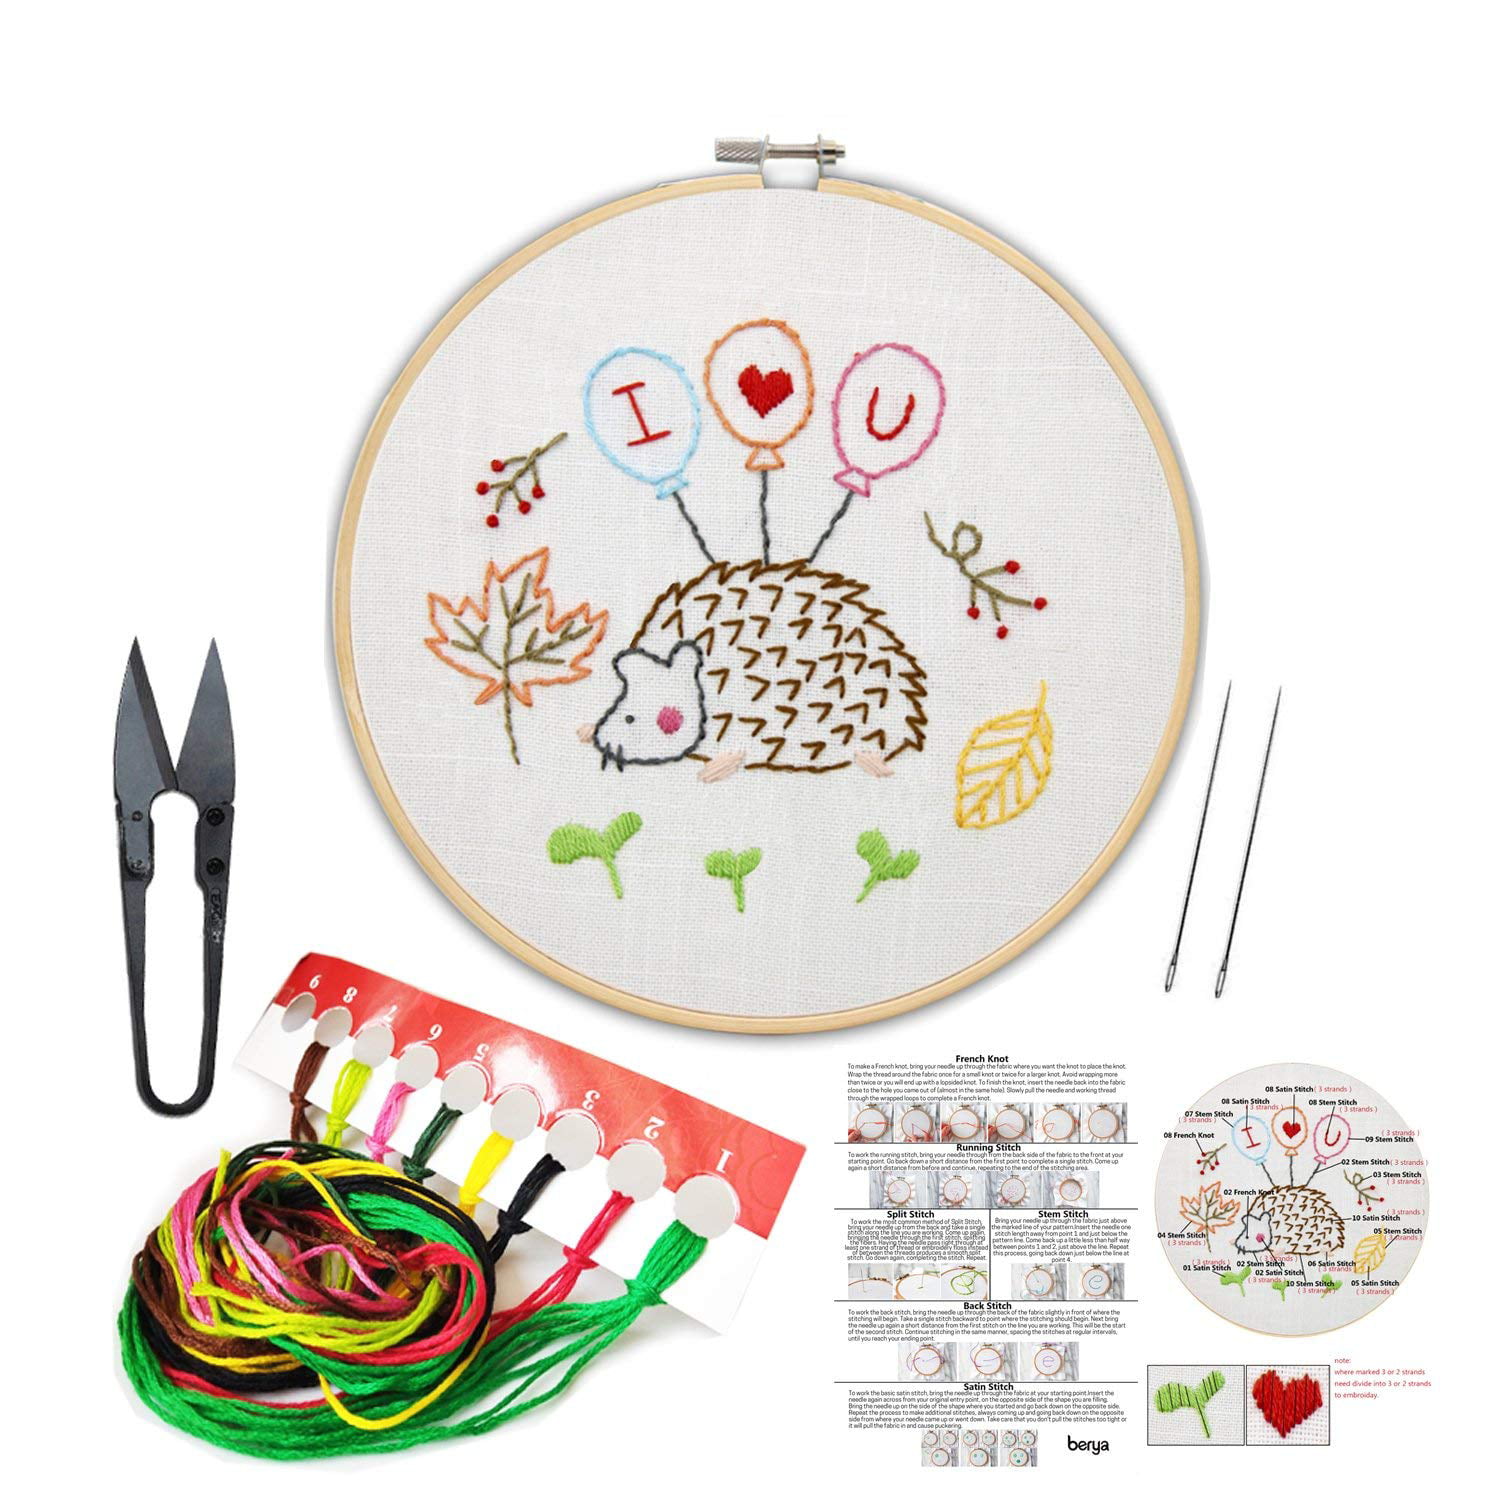 Full Set of Embroidery Starter Kit Cross Stitch Tool Kit Including 5 Pieces Bamboo Hoops 100 Color Threads 2 Pcs Aida Cloth 1 Storage Bag Necessary Embroidery Tools 